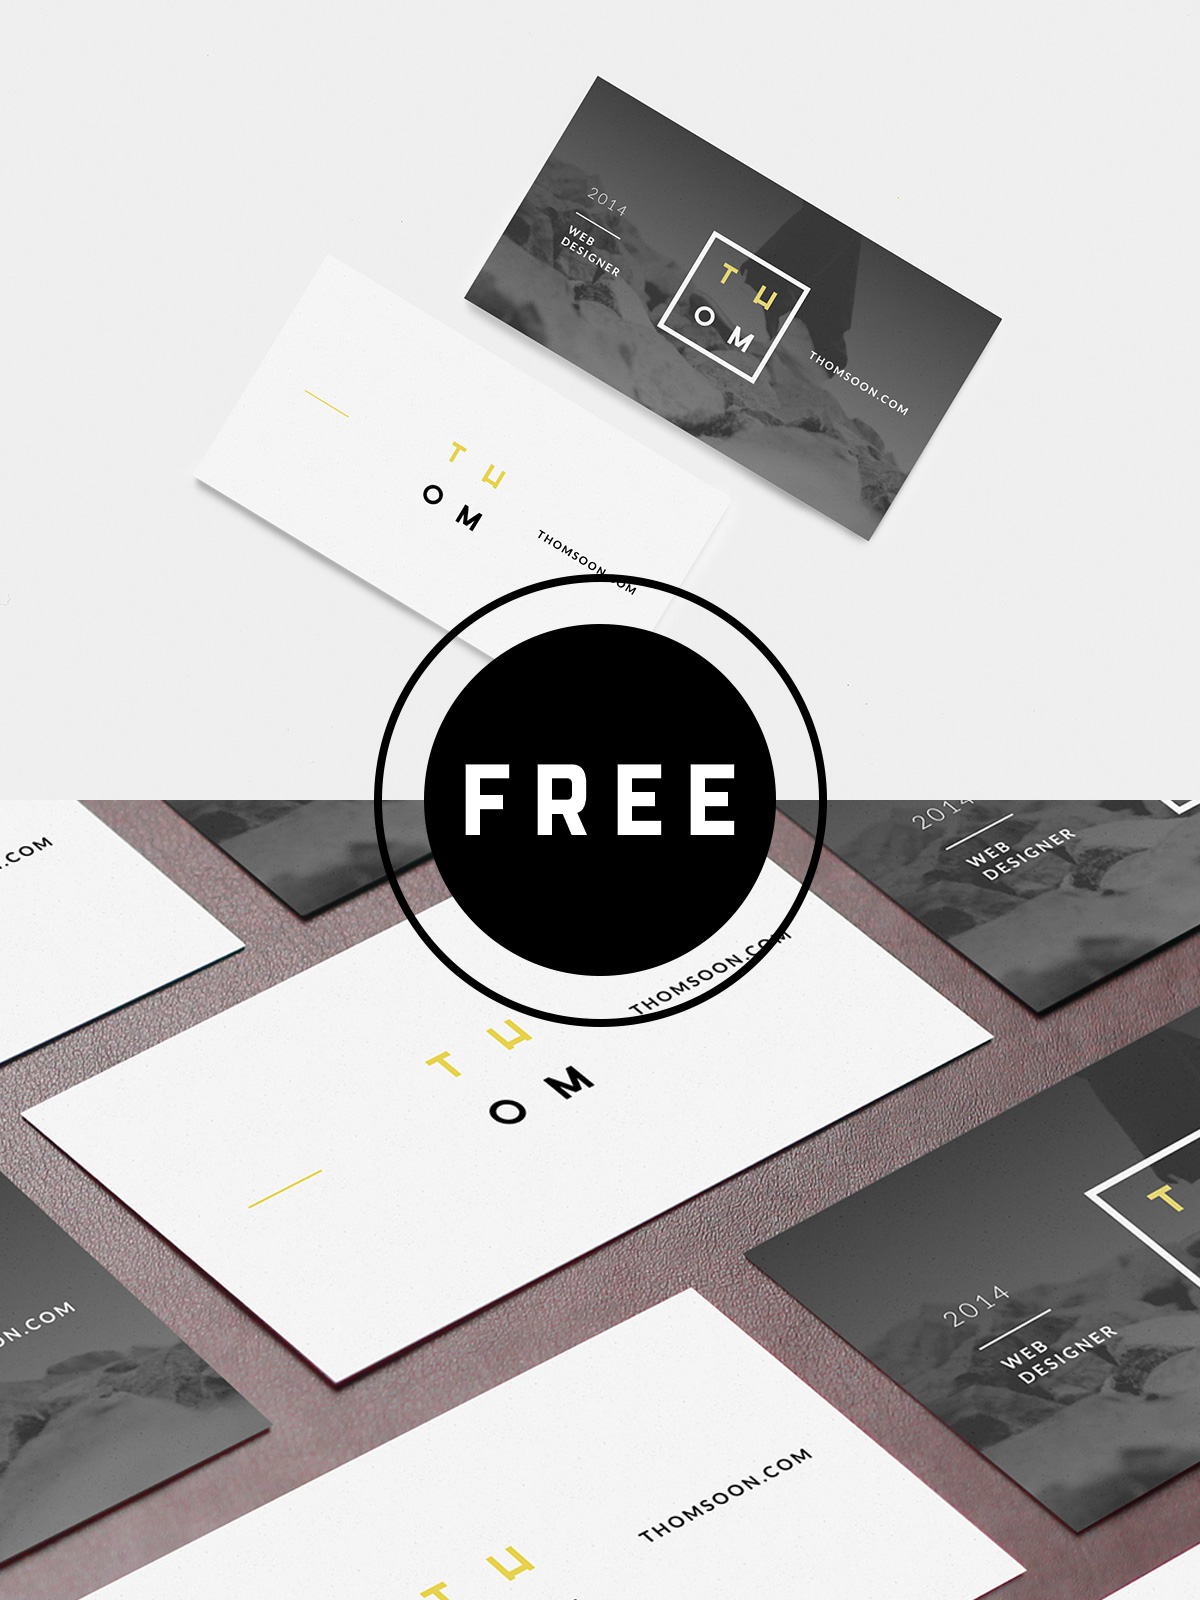 80 Great Free Business Card Mockups Templates That You Can Download